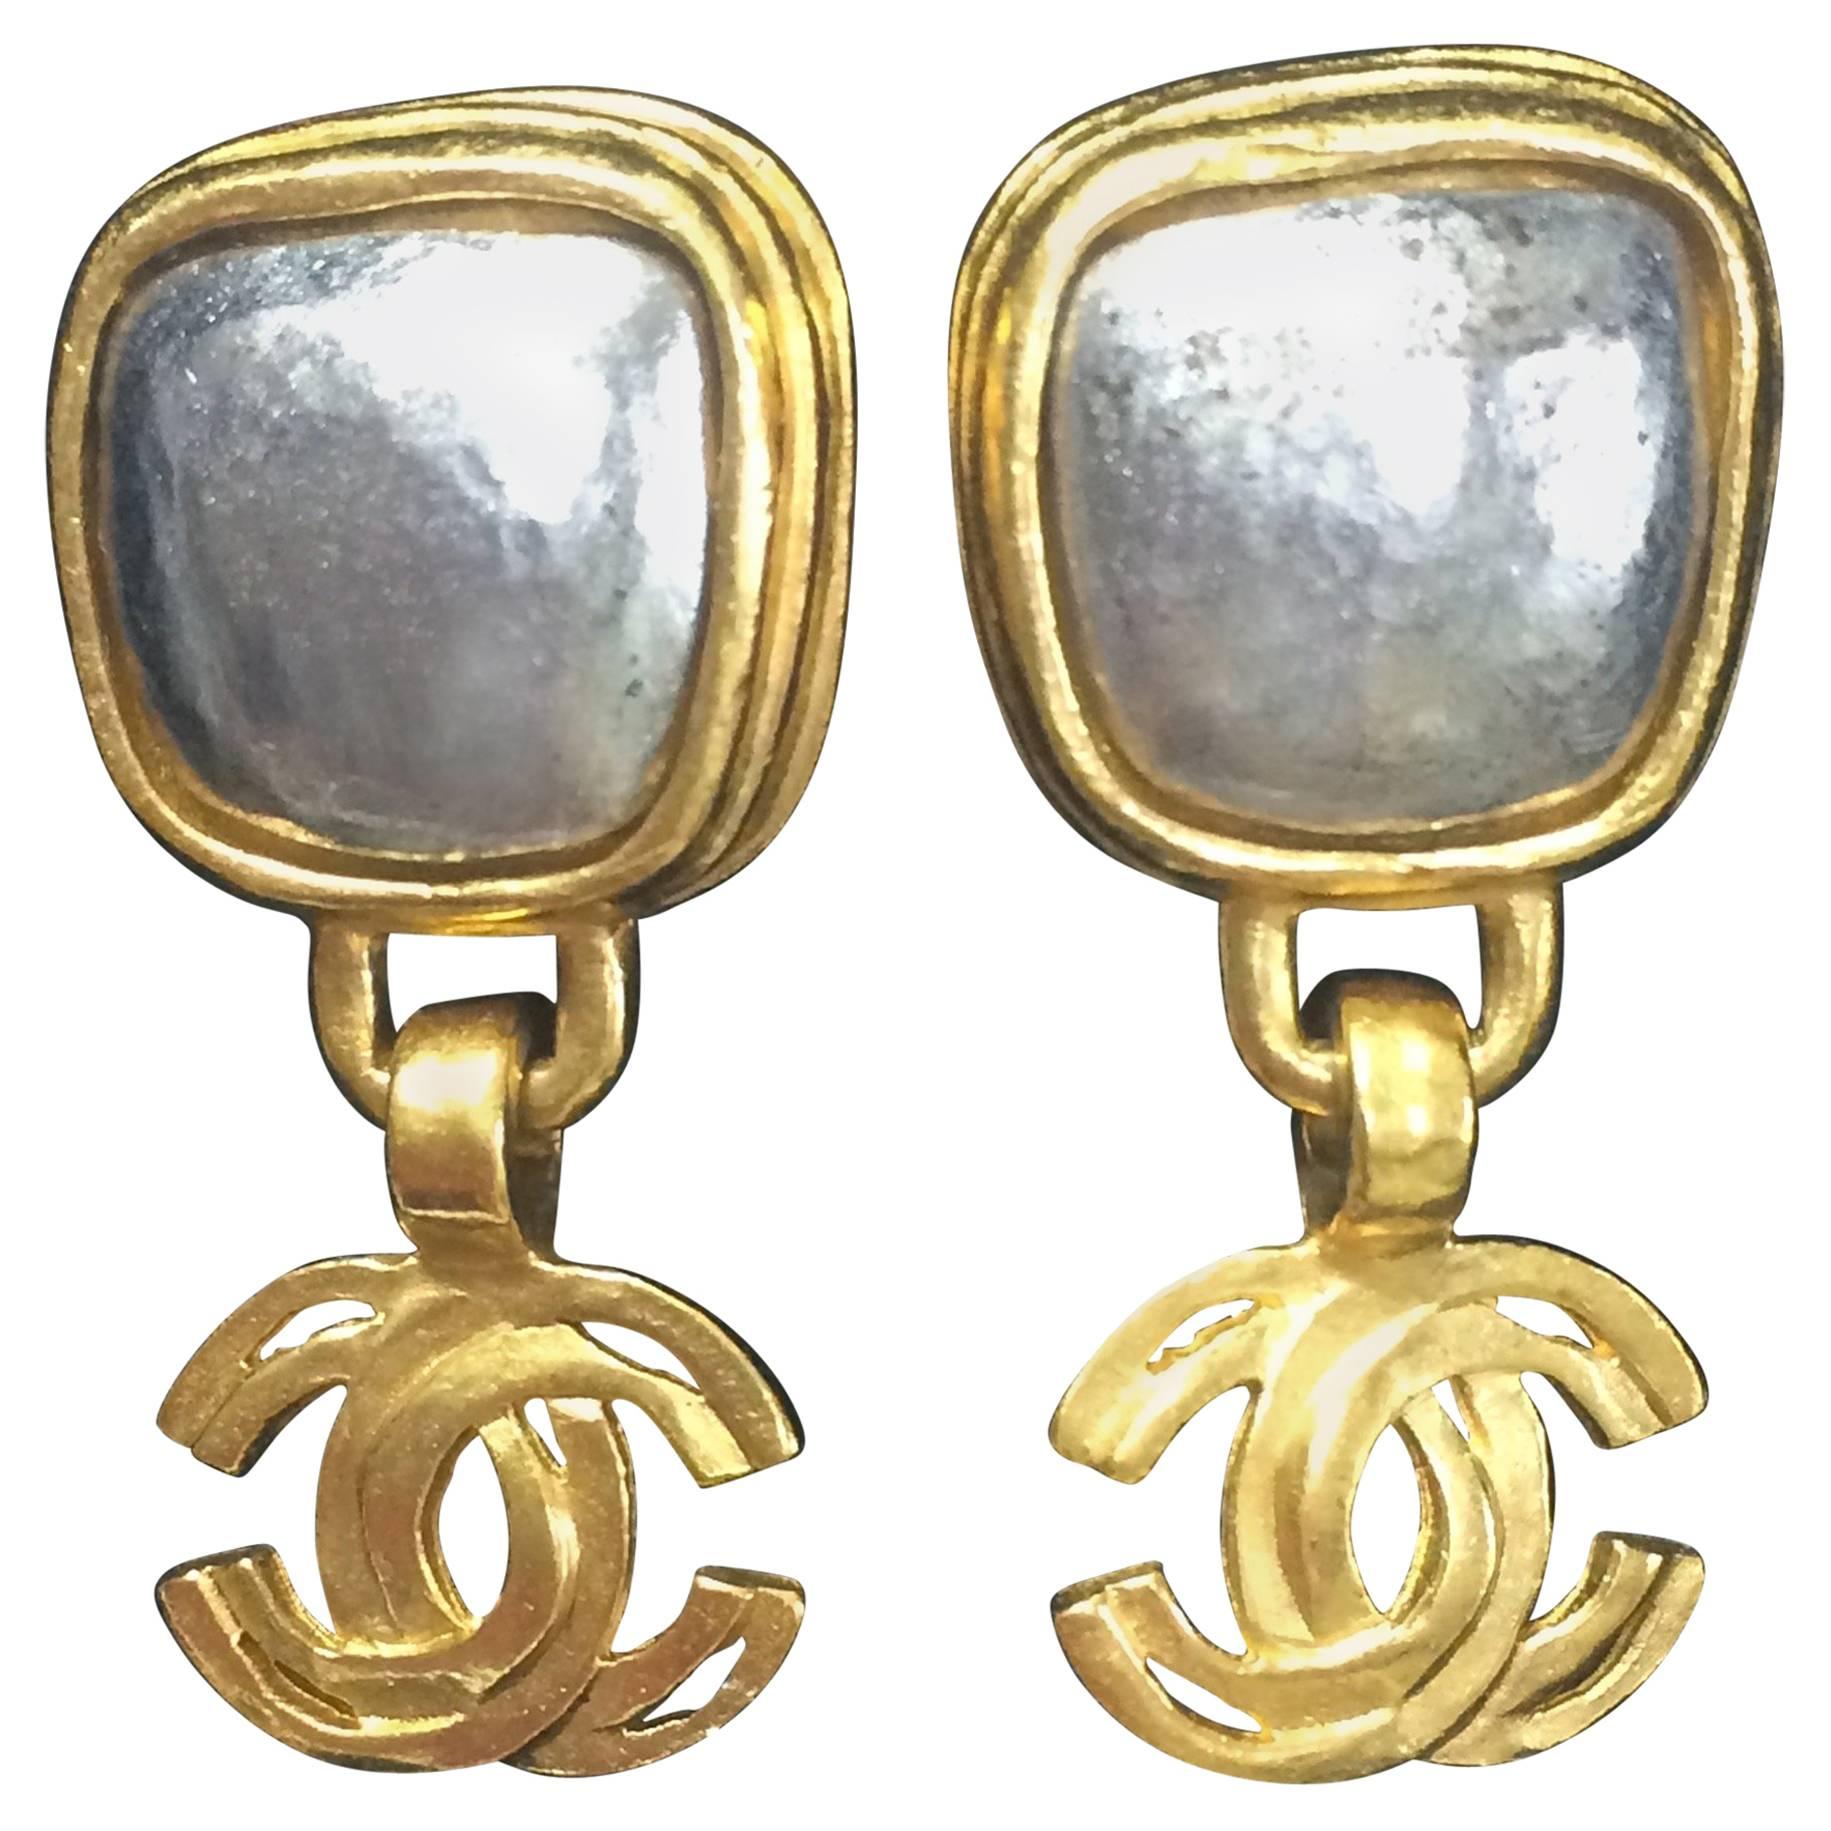 Vintage CHANEL dangling earrings with large CC mark and gunmetal faux pearls. For Sale